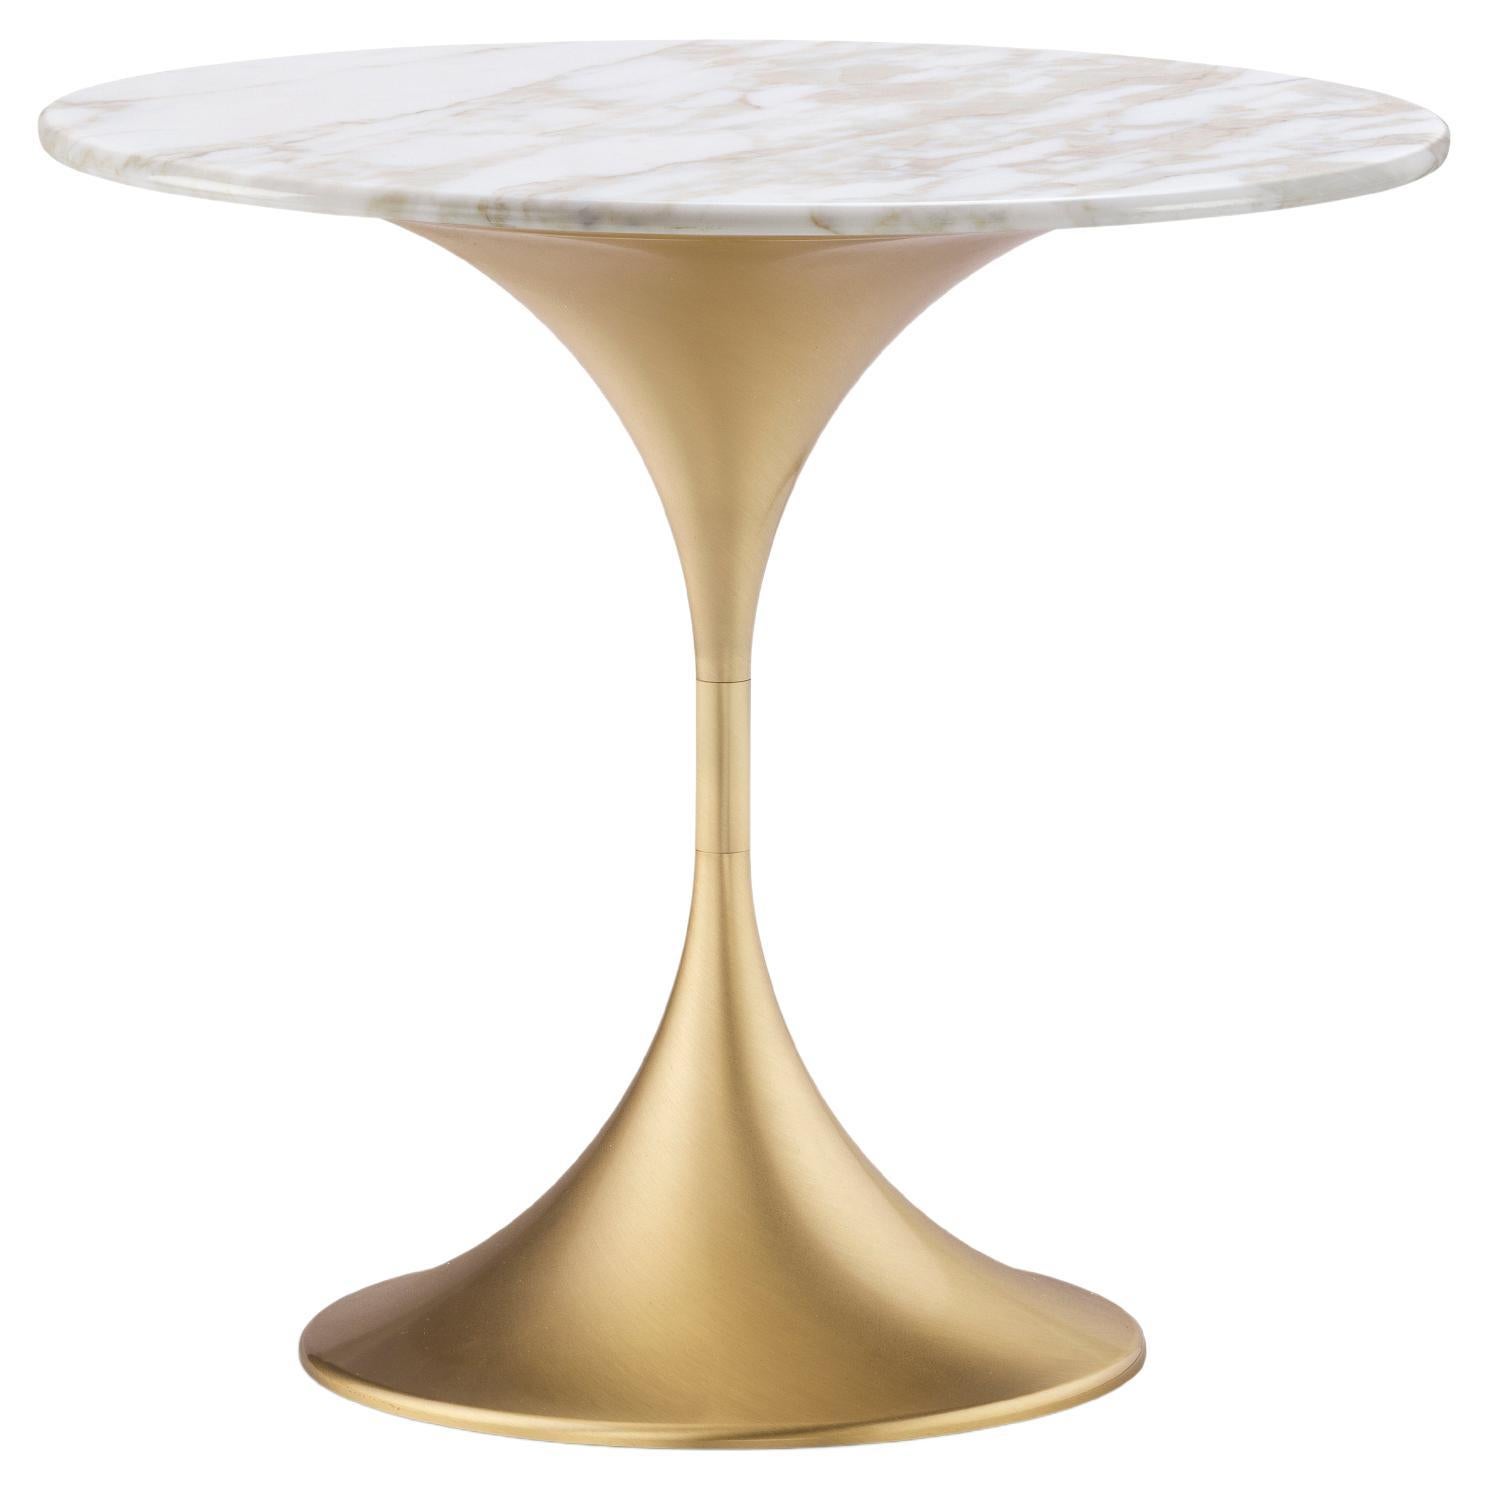 Dapertutto Short Table, Calacatta Gold Top, Satin Brass , Made in Italy